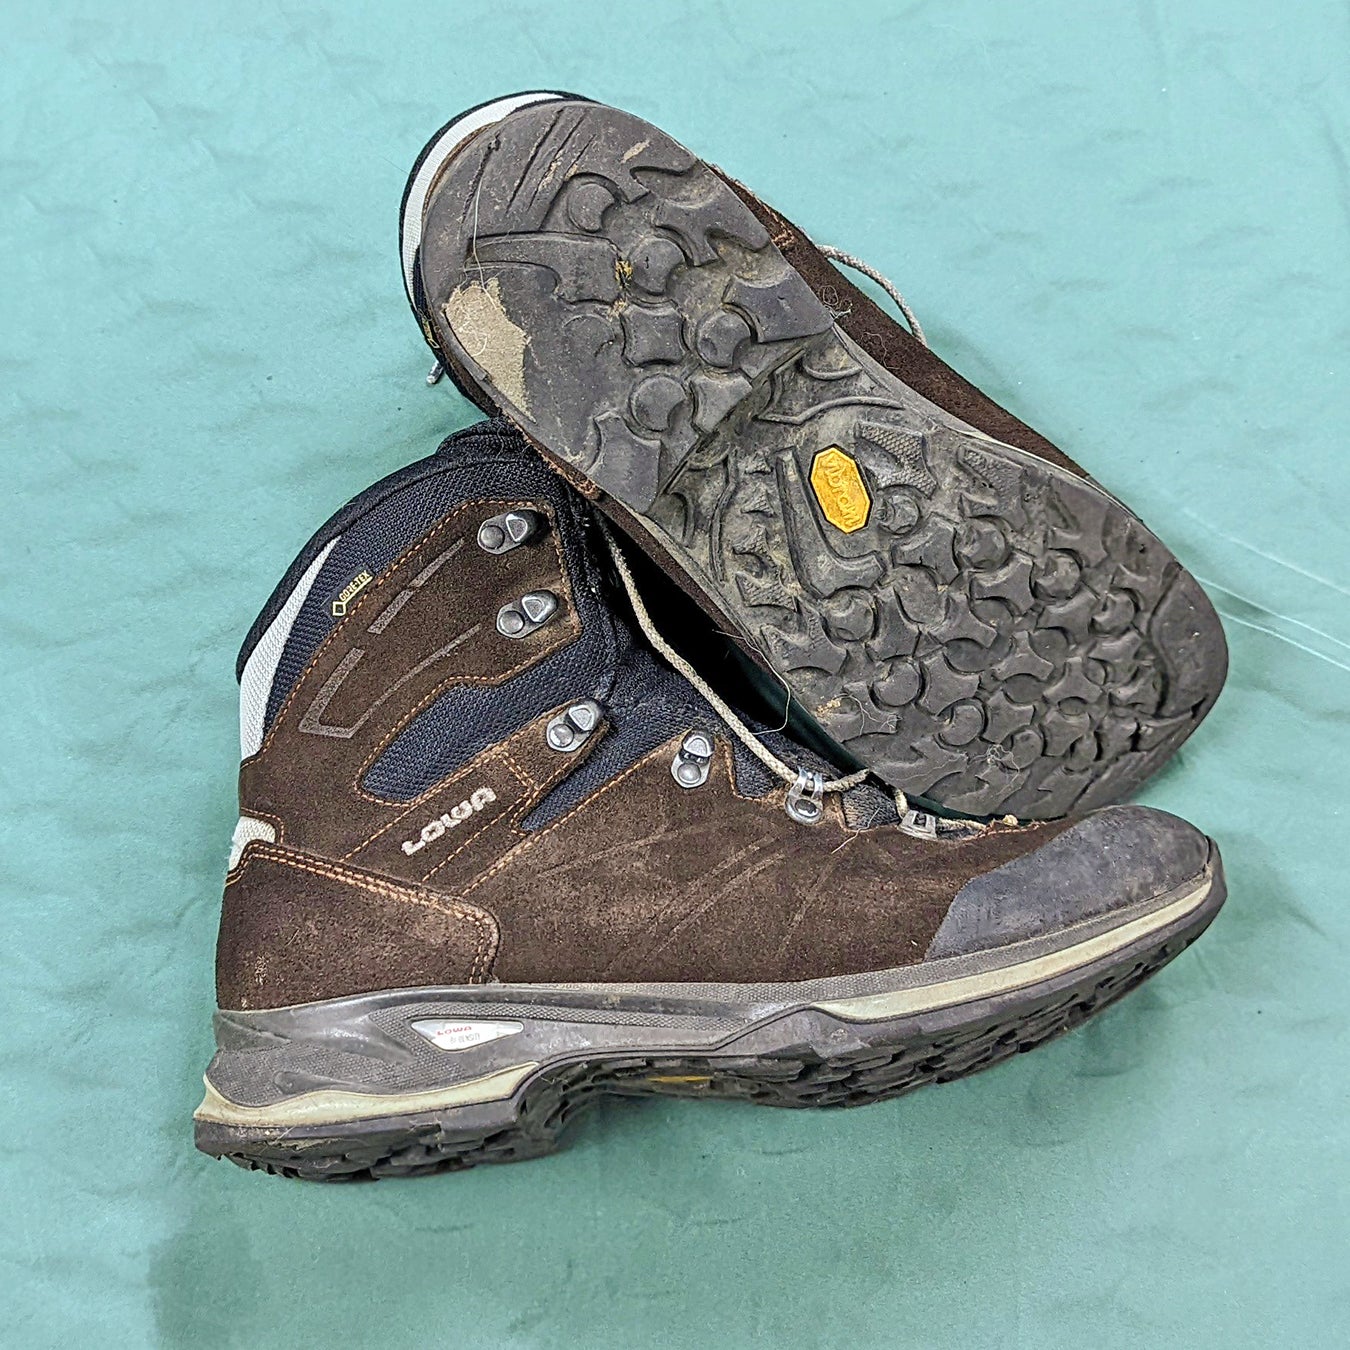 schipper moederlijk thema An Ode to the Lowa Baldos, the Best Pair of Hiking Boots I'll Ever Wear -  Outside Online